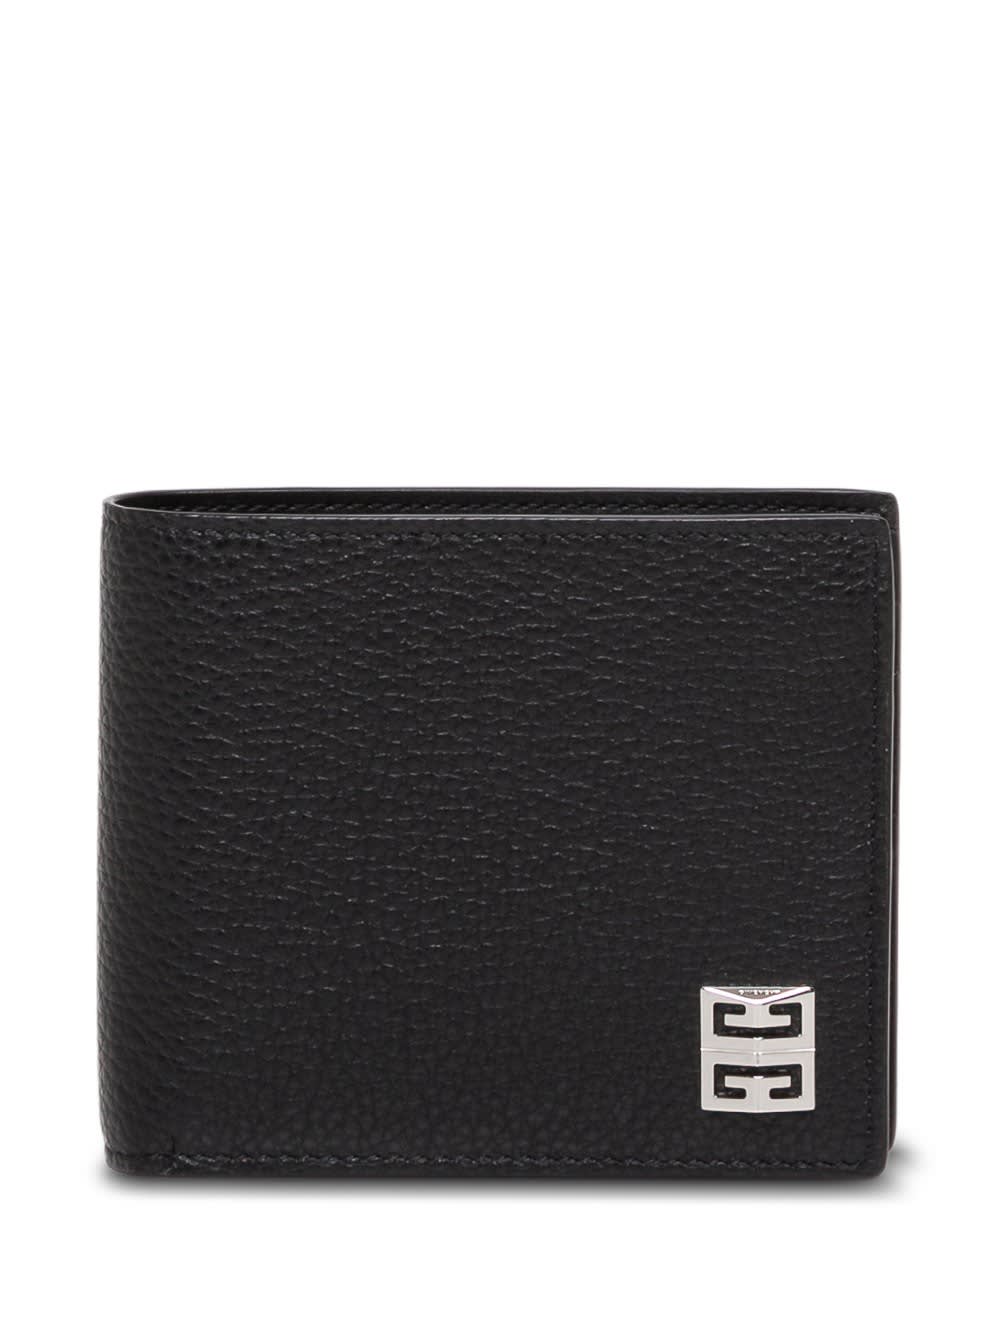 Givenchy Black Hammered Leather Wallet